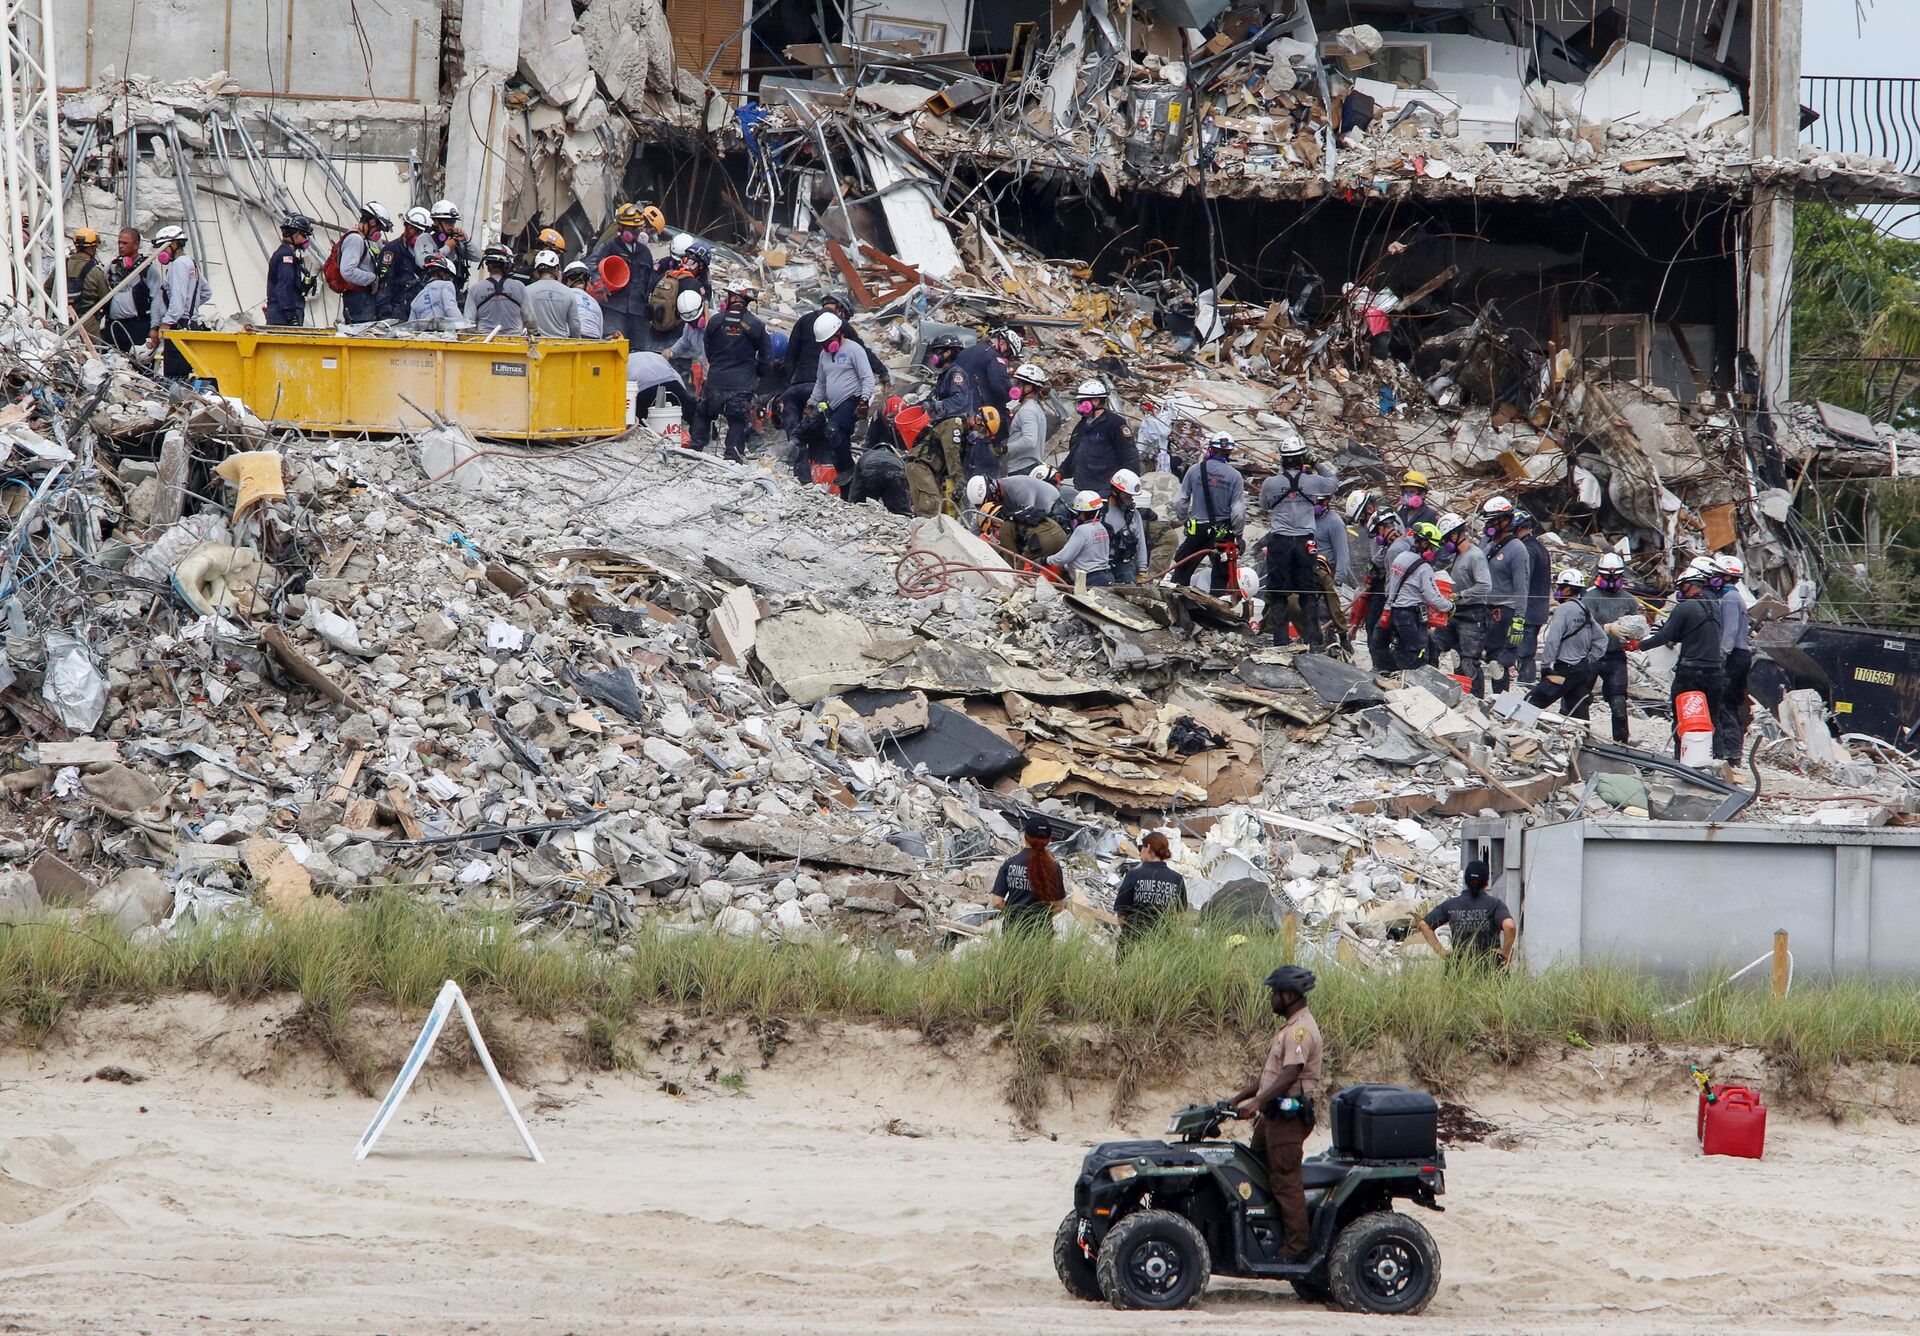 More Bodies Discovered Under Rubble of Collapsed Building in Florida, Israeli Commander Says - Sputnik International, 1920, 30.06.2021